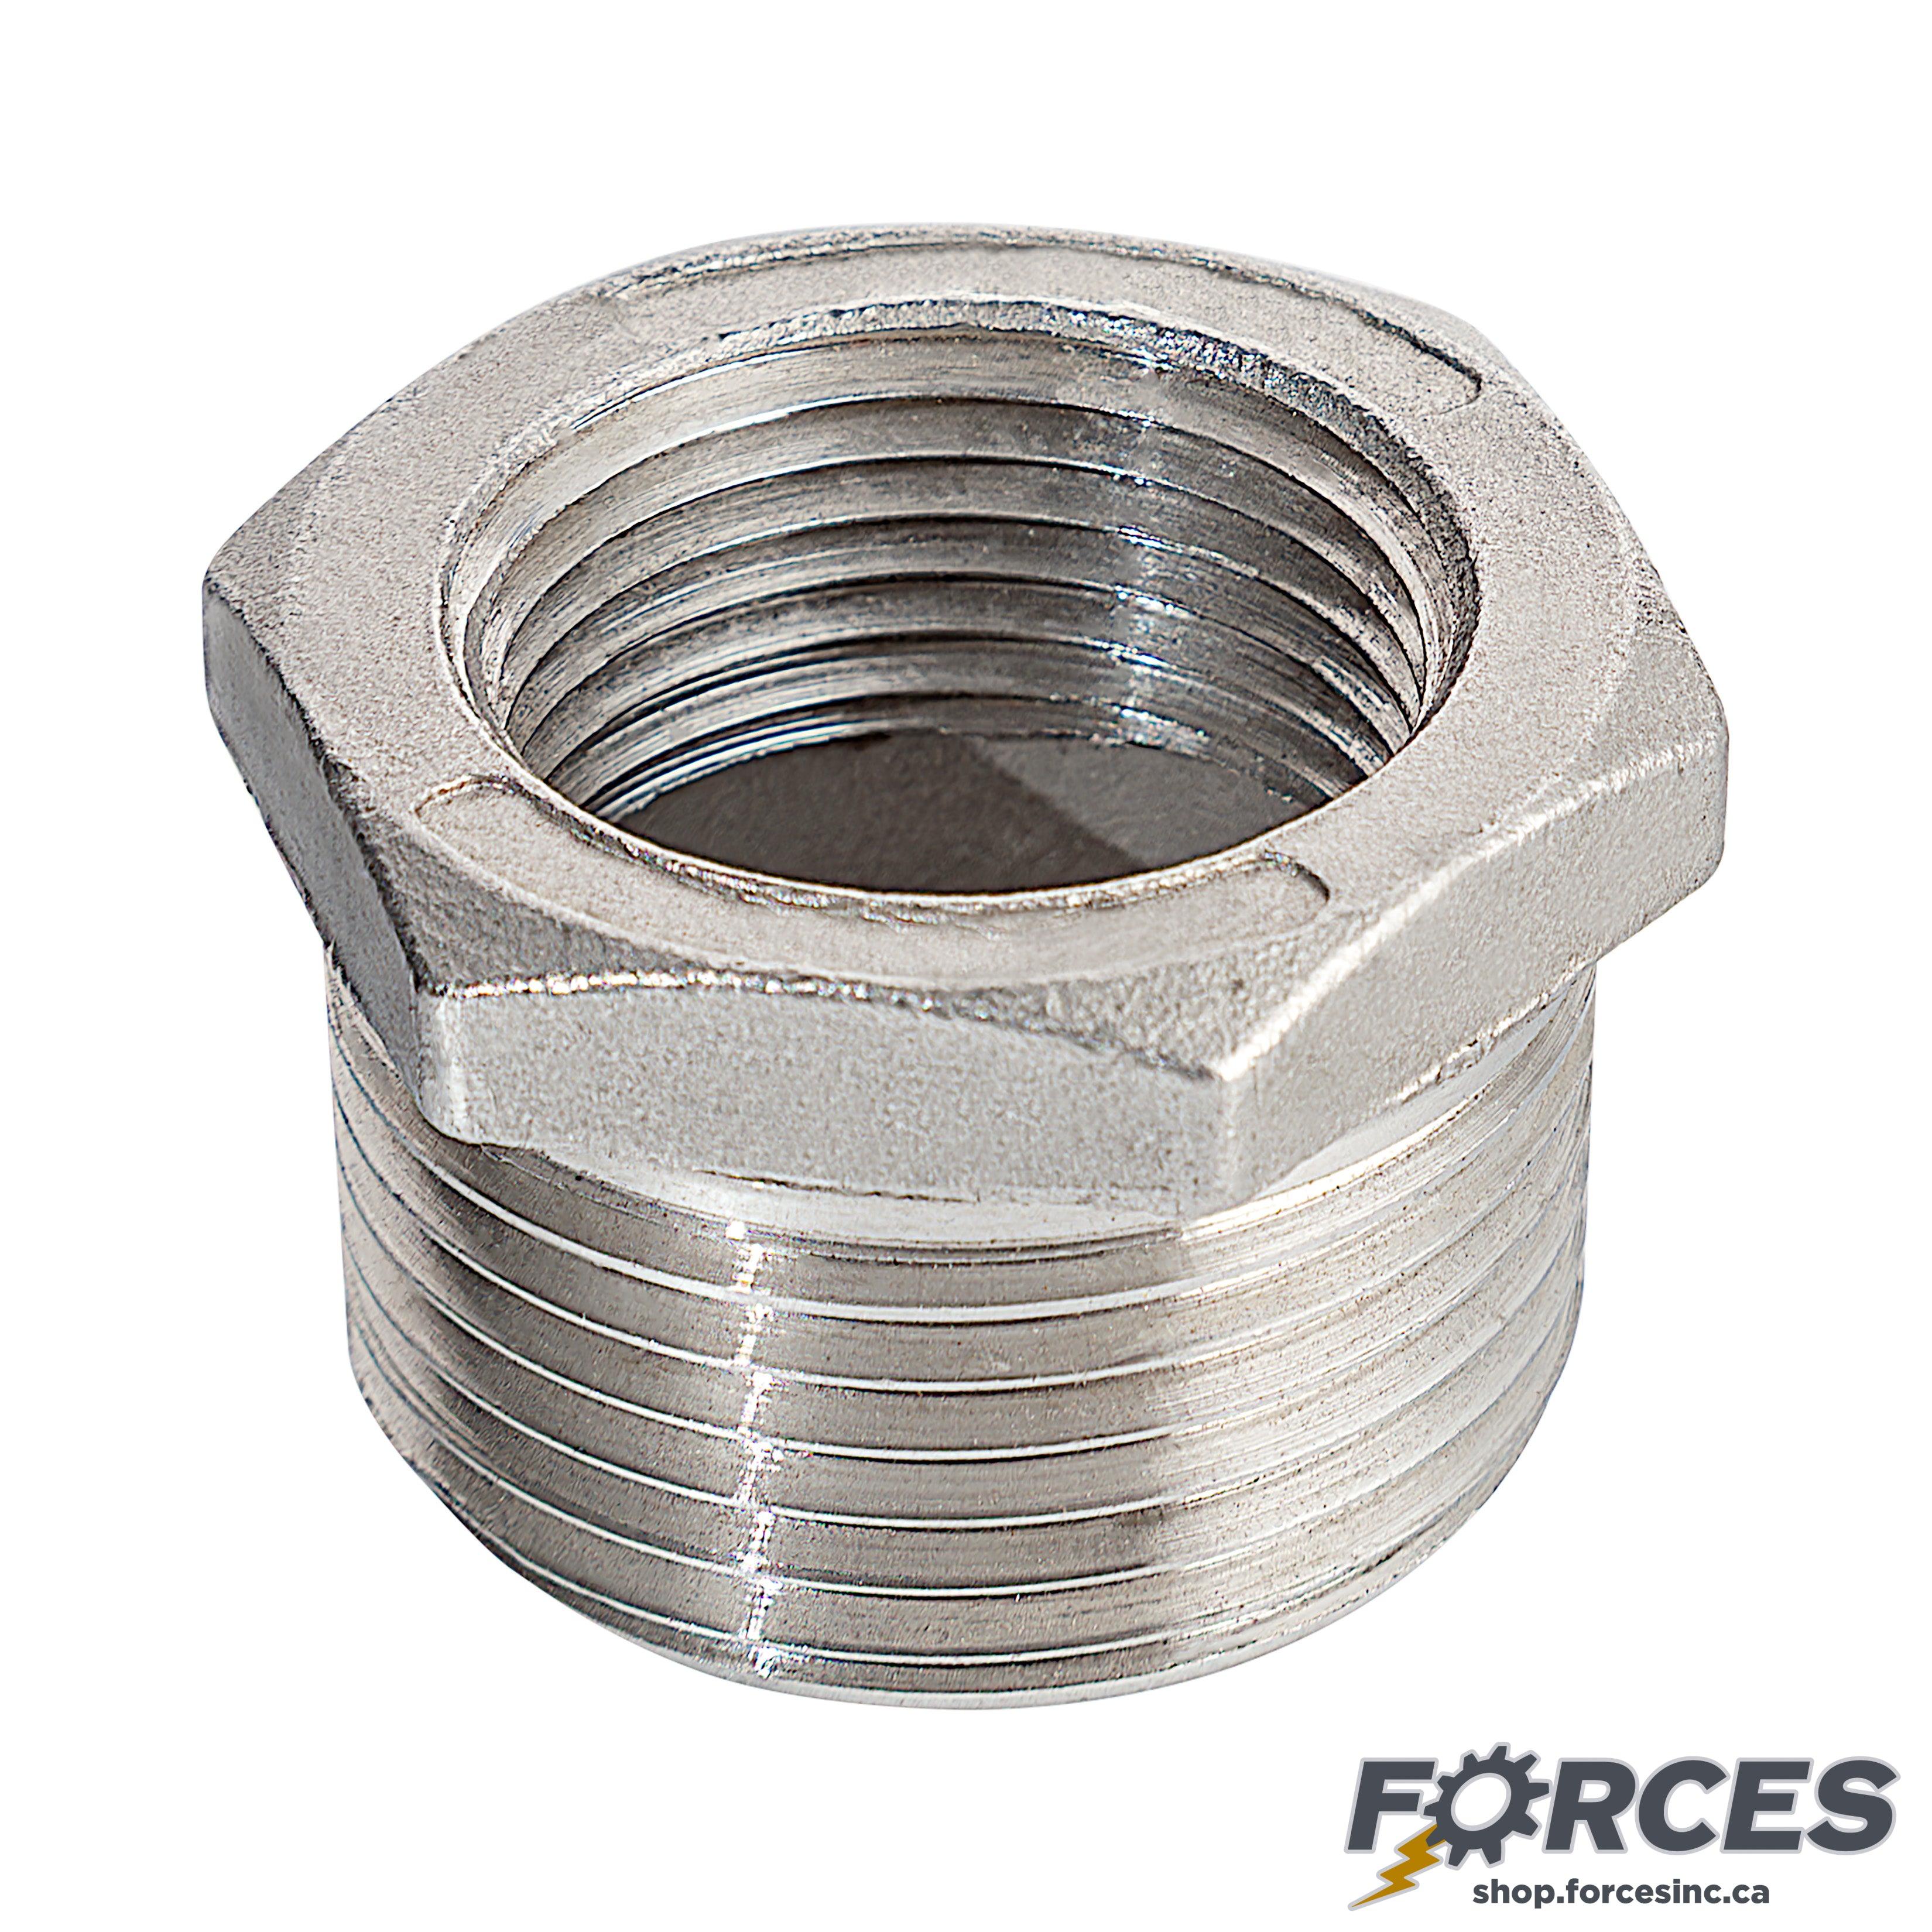 1-1/4" (M) x 3/4" (F) Reducing Hex Bushing NPT #150 - Stainless Steel 316 - Forces Inc